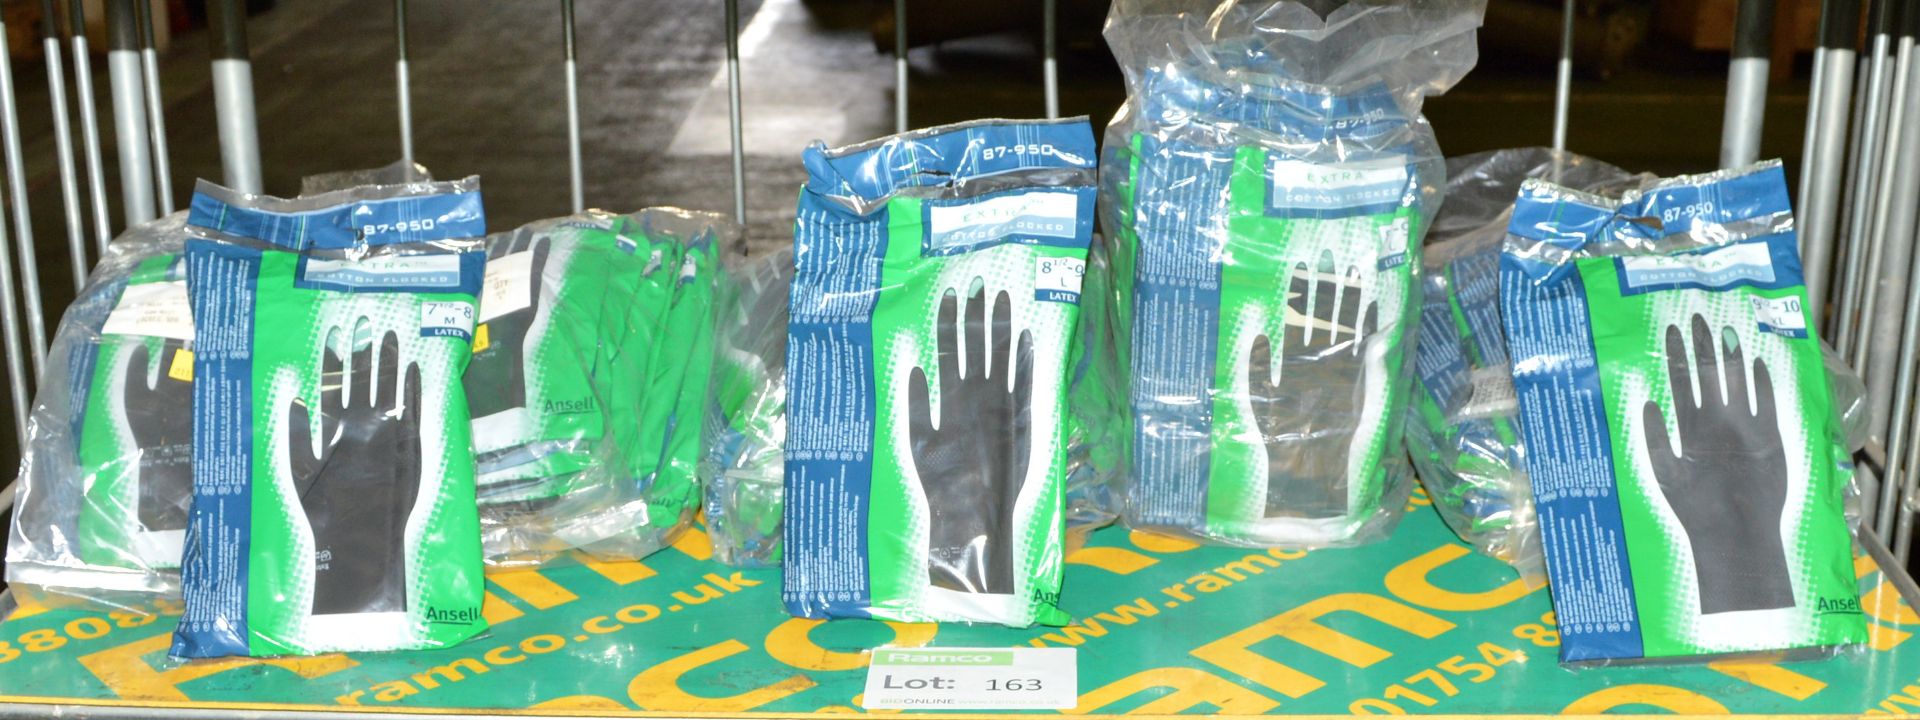 5x Packs Latex Gloves - Size 71/2 to 10